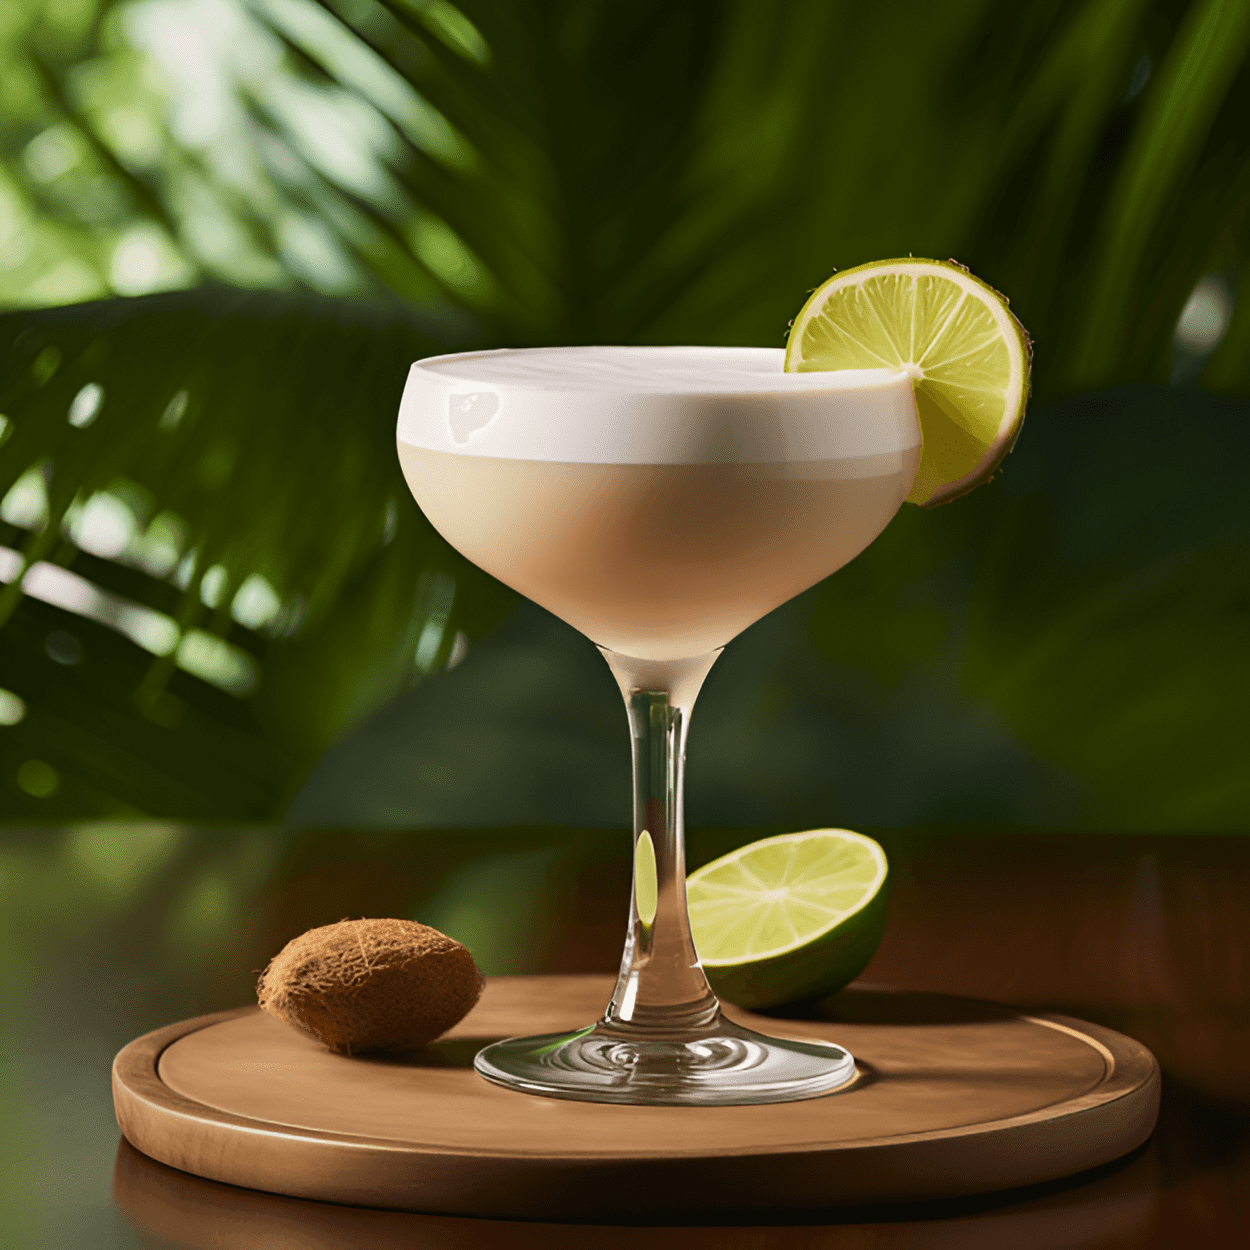 Kava Bliss Cocktail Recipe - The Kava Bliss cocktail has a unique, earthy flavor with a hint of sweetness from the honey. The kava provides a slightly bitter, peppery taste, which is balanced by the creamy coconut milk. The lime juice adds a refreshing, tangy twist to the mix.